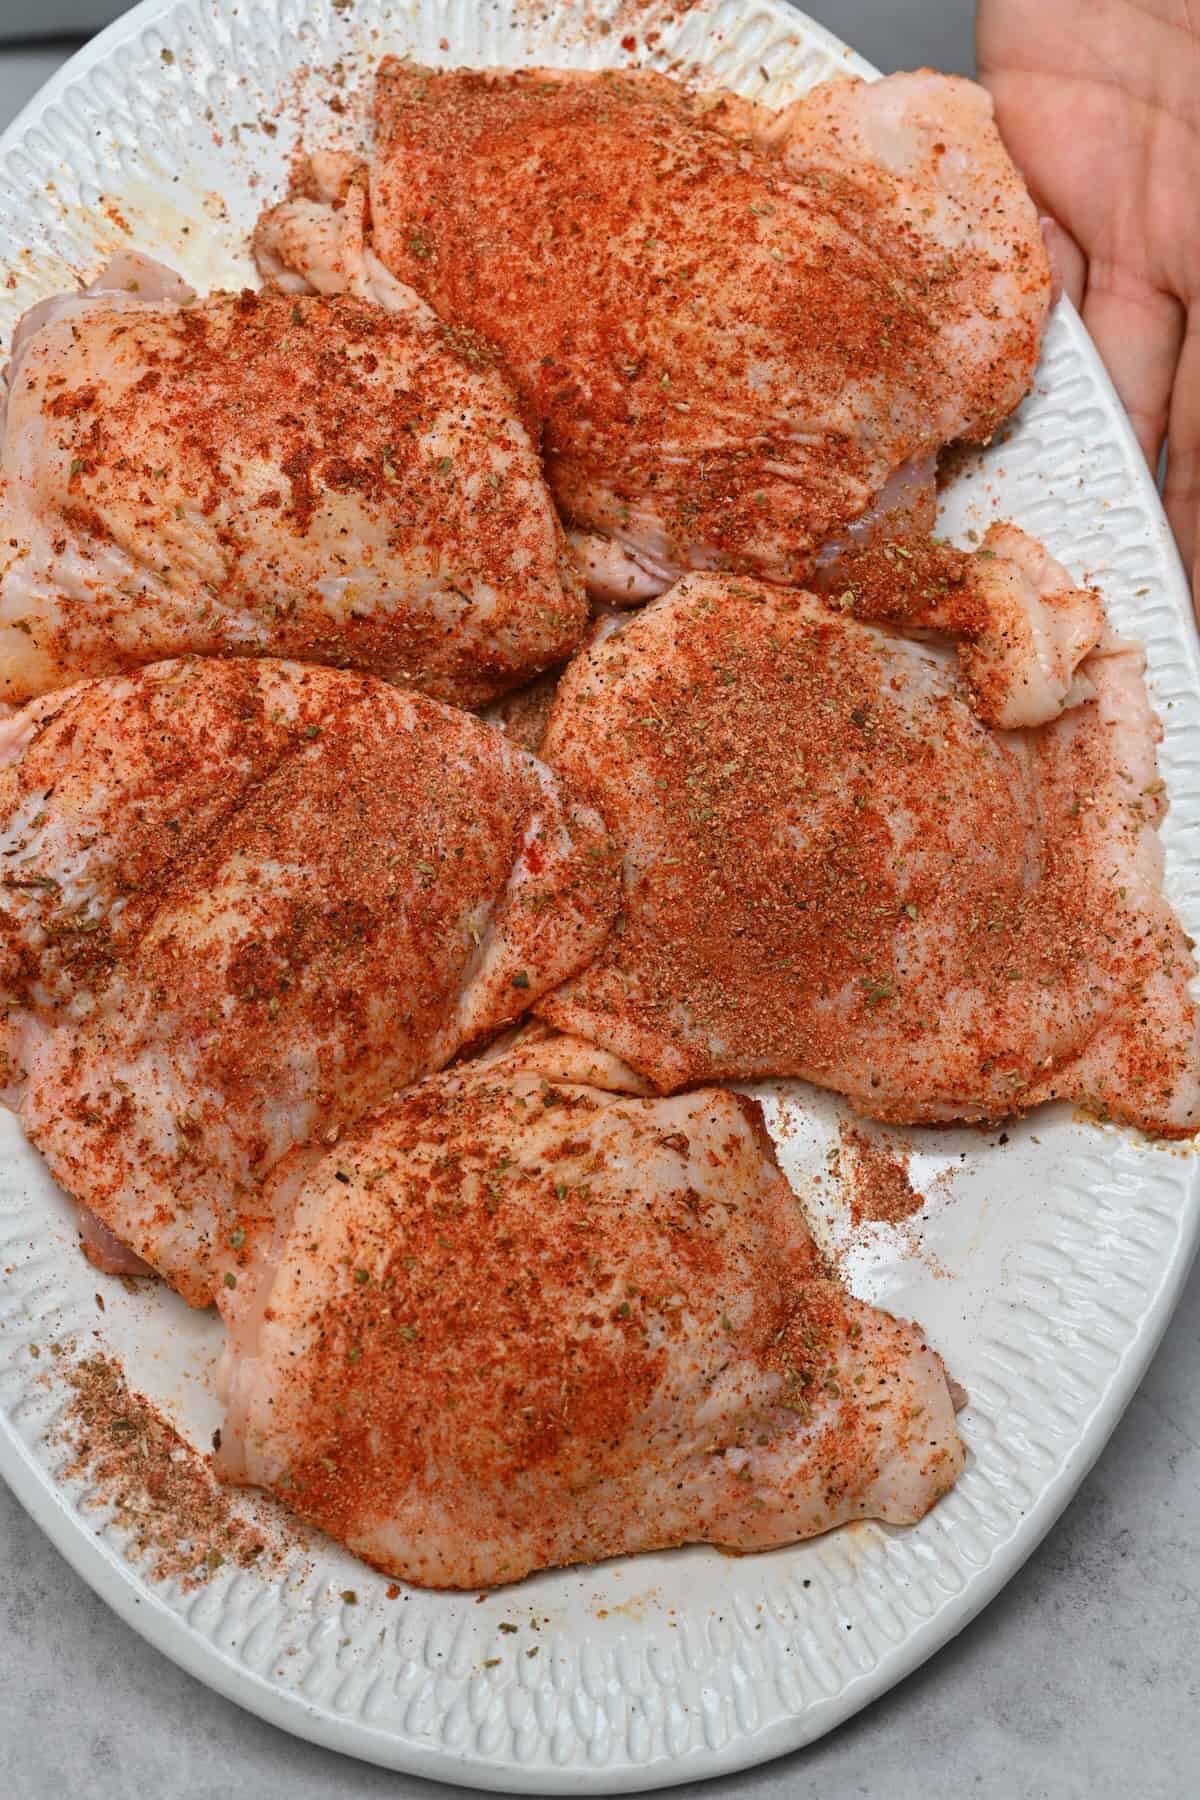 Chicken pieces rubbed with seasoning spices